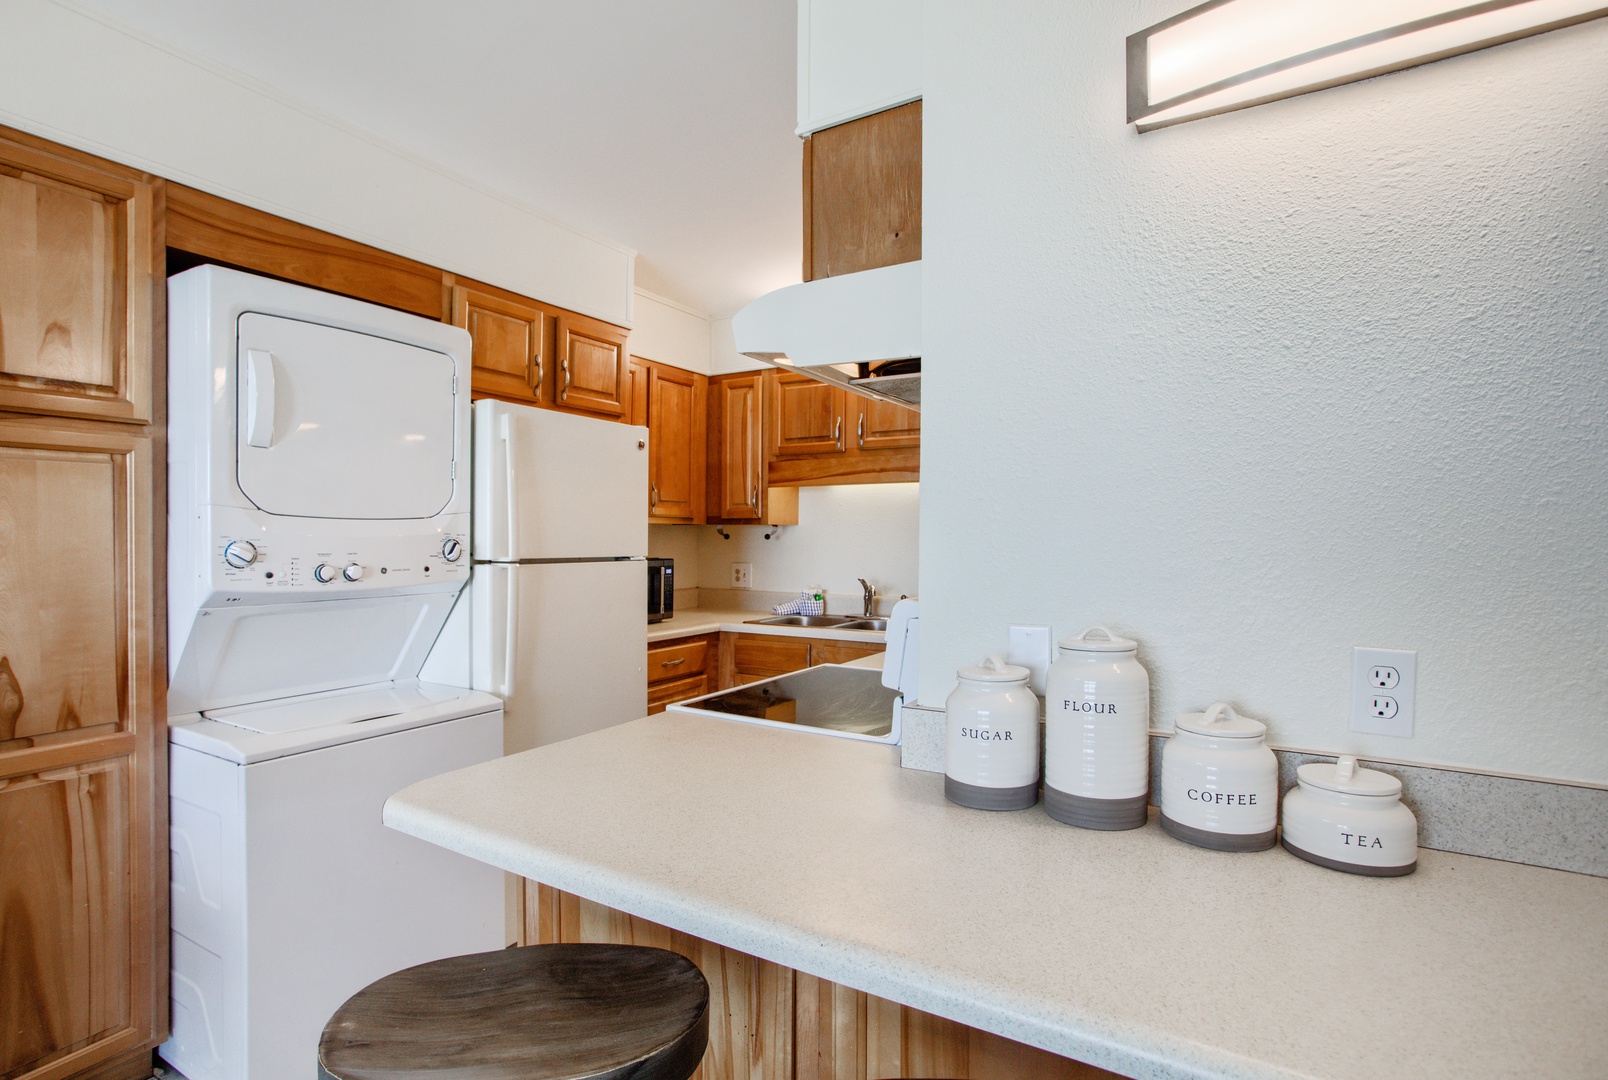 Private Laundry is available for your stay, conveniently tucked into the kitchen